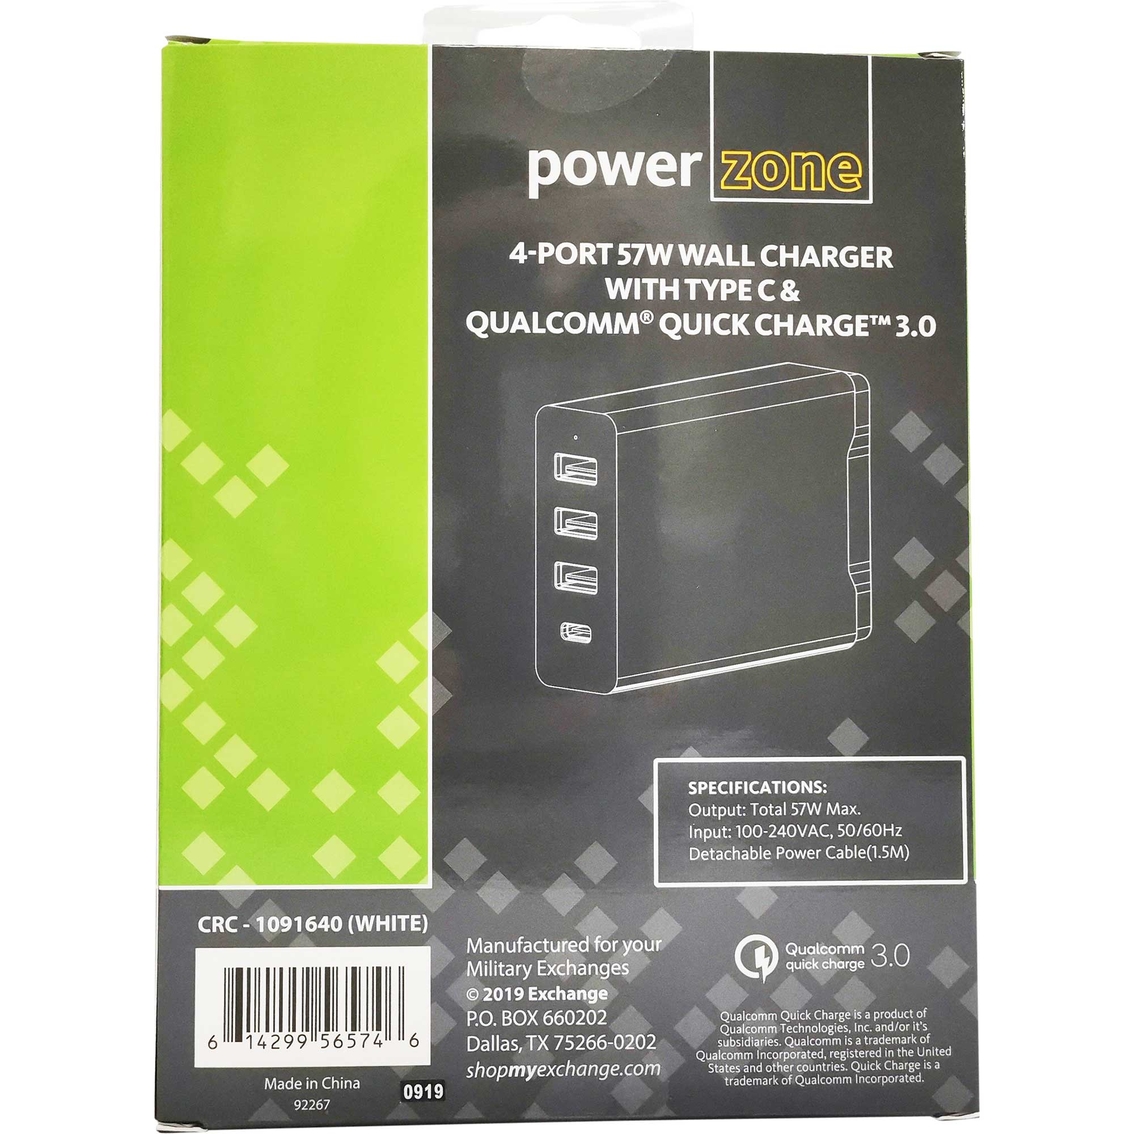 Powerzone 4 Port 57W Wall Charger with Type C & Qualcomm Quick Charge 3.0 - Image 4 of 4